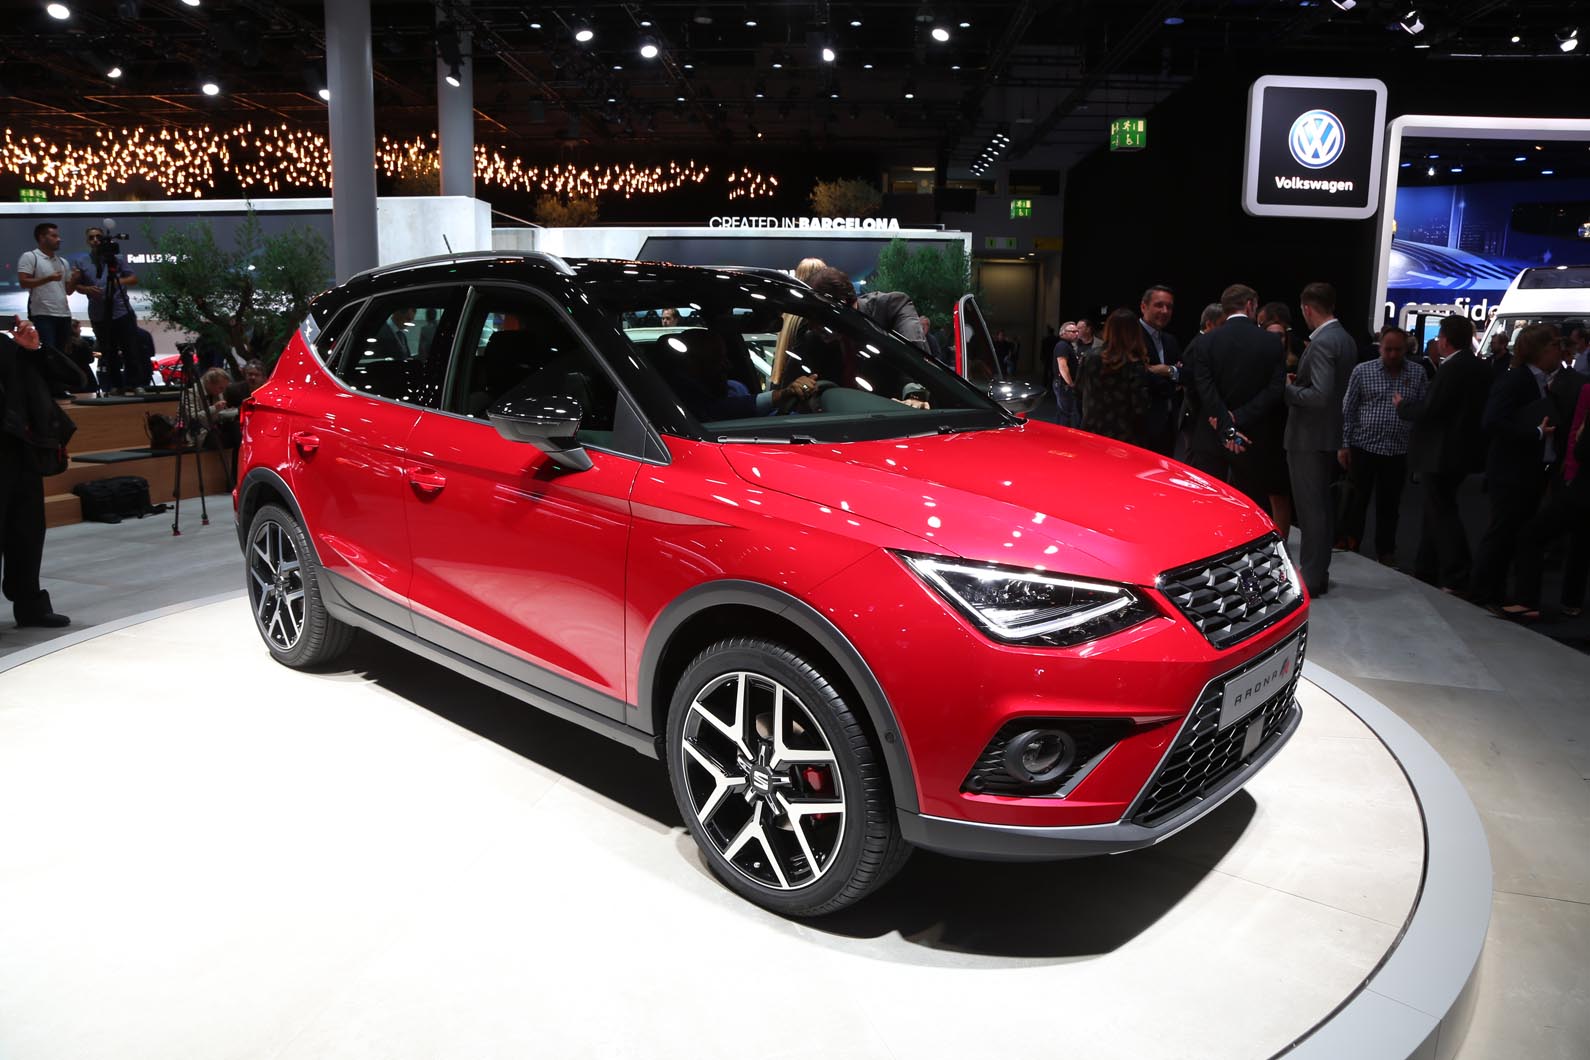 Fleet Challenger Test - SEAT Arona: Riding high, but down to earth